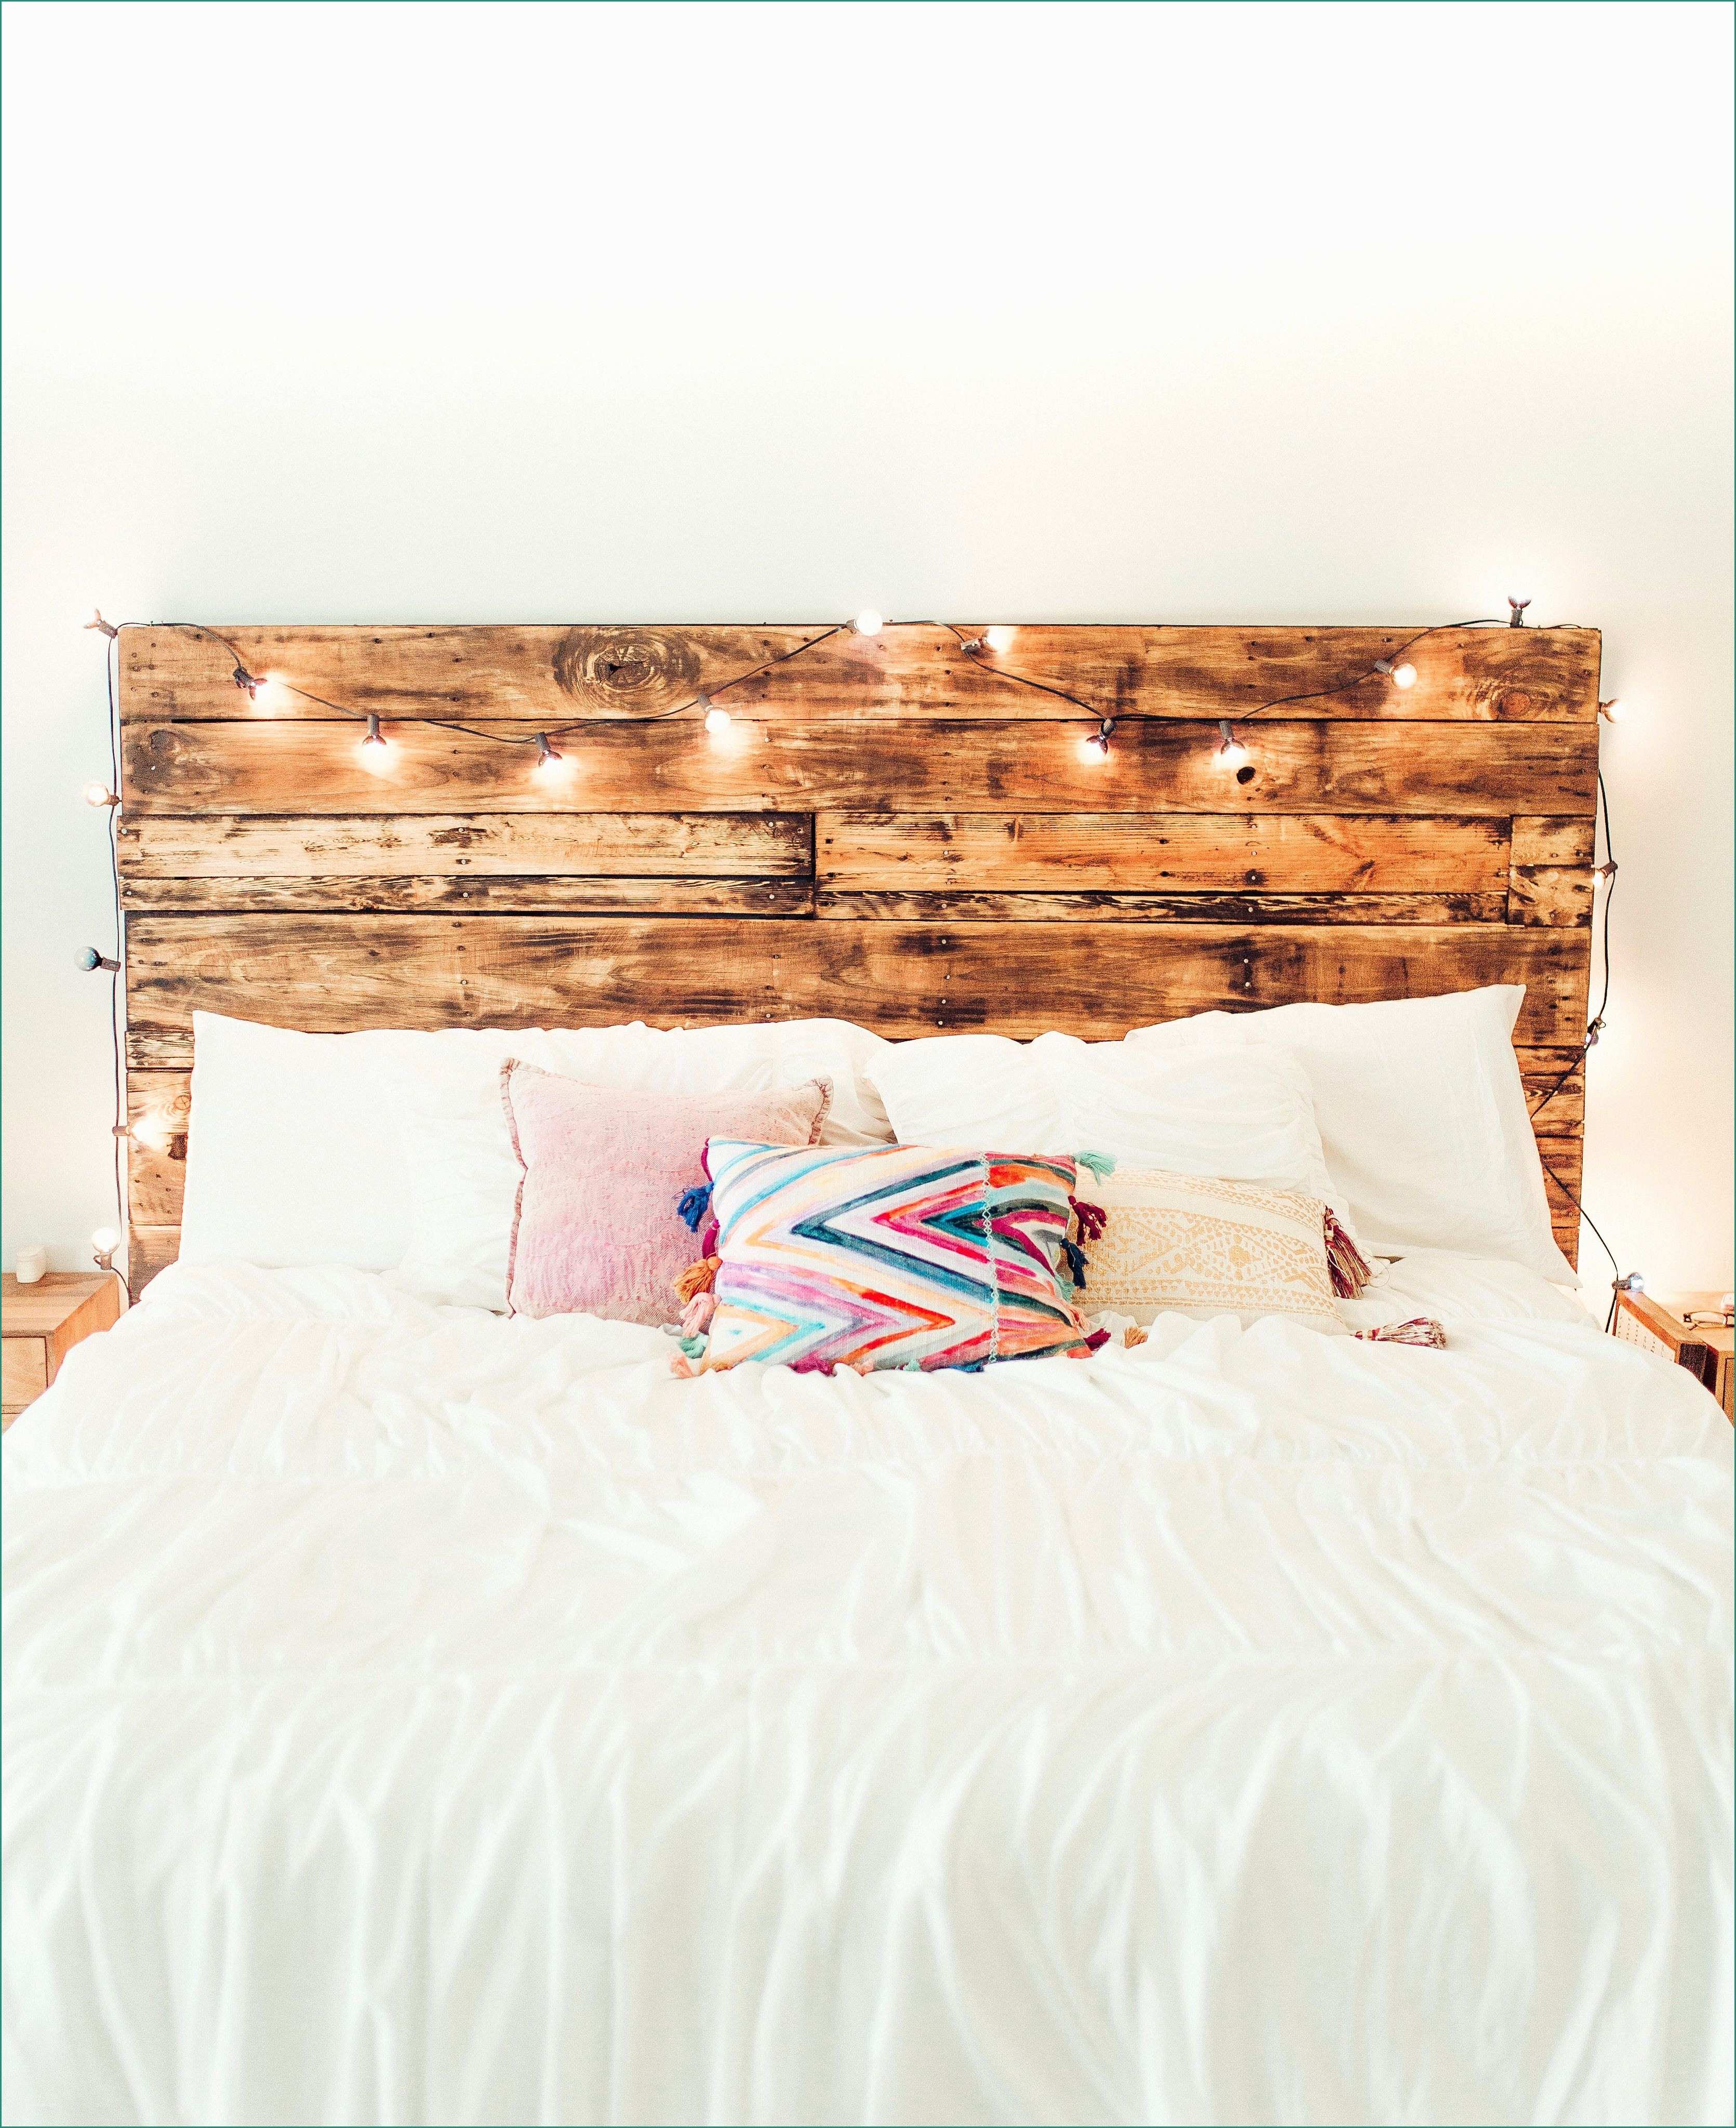 Letto Matrimoniale Con Bancali E How to Make A Diy Pallet Headboard Like Ours